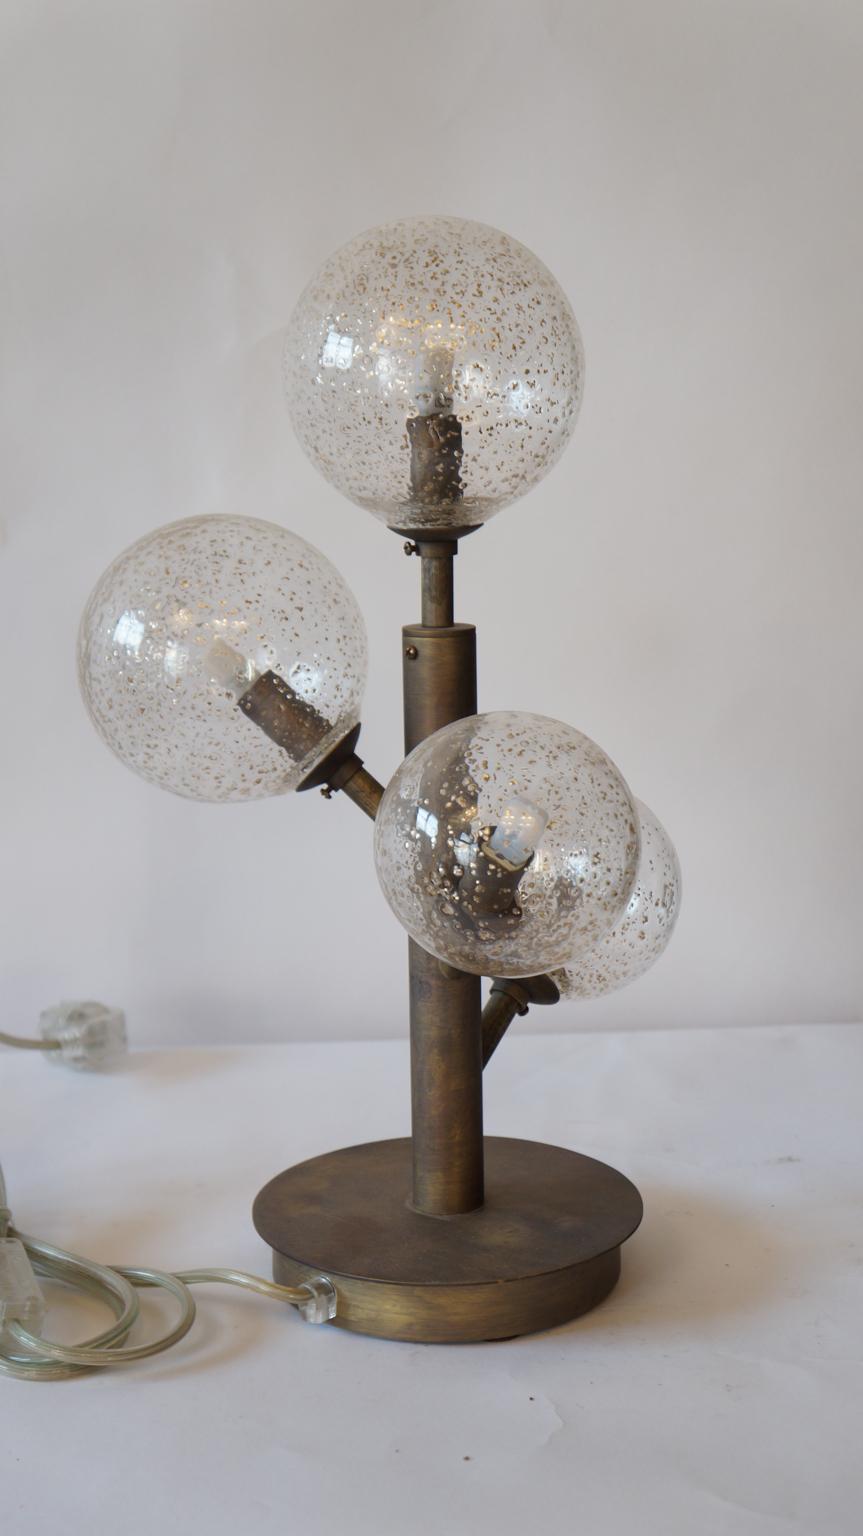 Alberto Donà Mid-Century Modern Crystal Mika One Murano Glass Table Lamp, 1998 For Sale 4